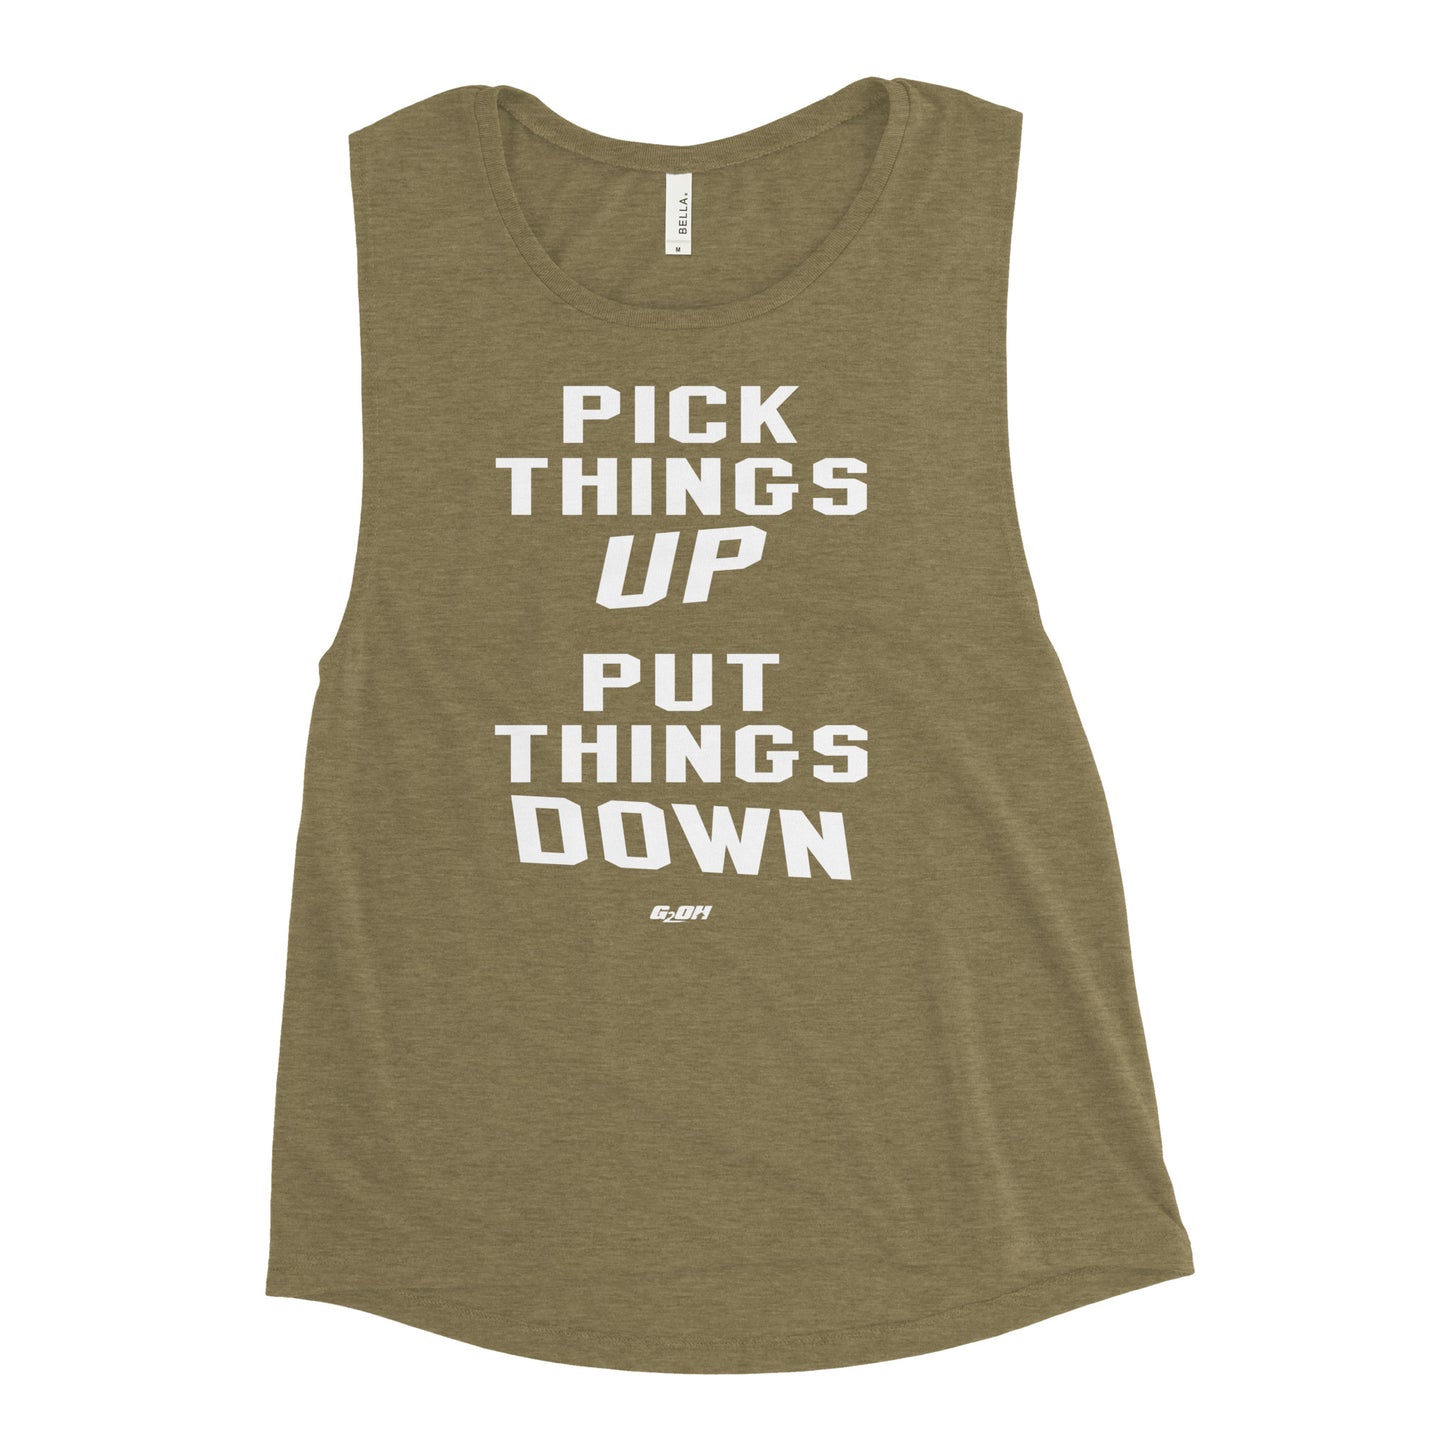 Pick Things Up, Put Things Down Women's Muscle Tank